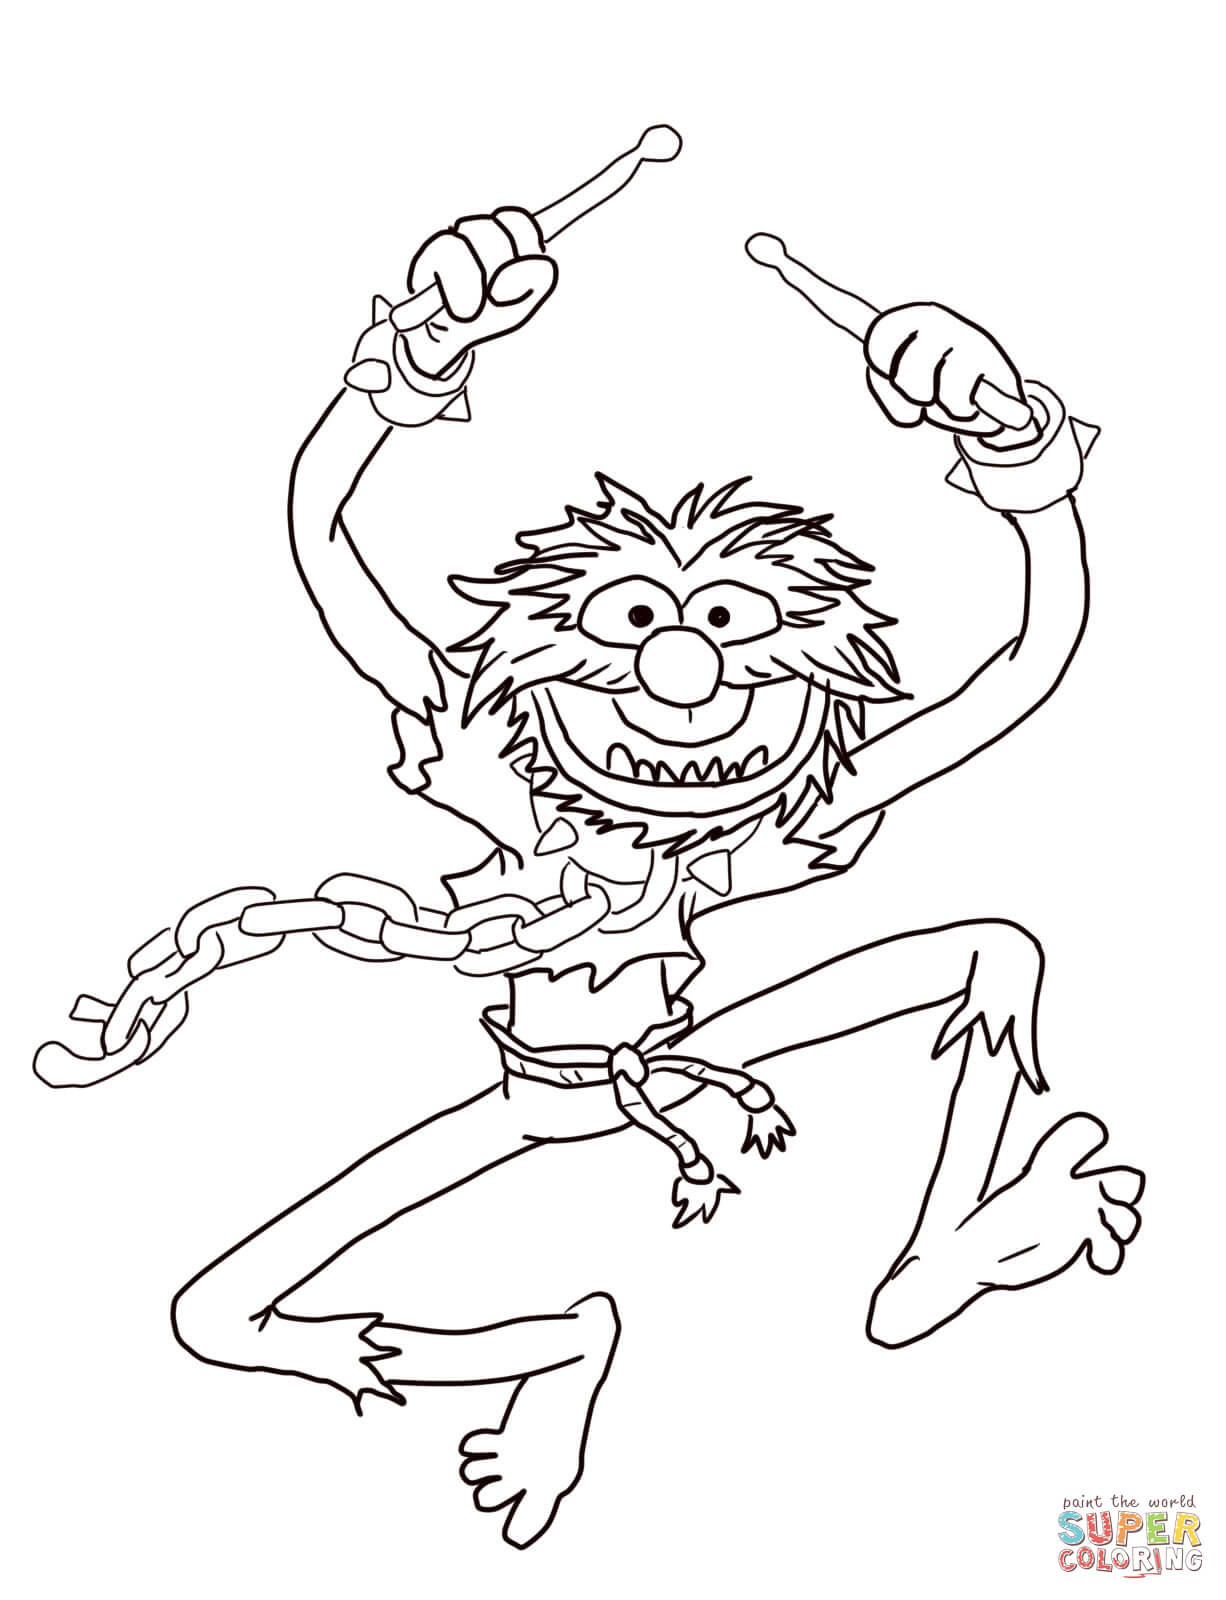 Muppets Coloring Book Pages
 Muppets Animal with Drumsticks coloring page